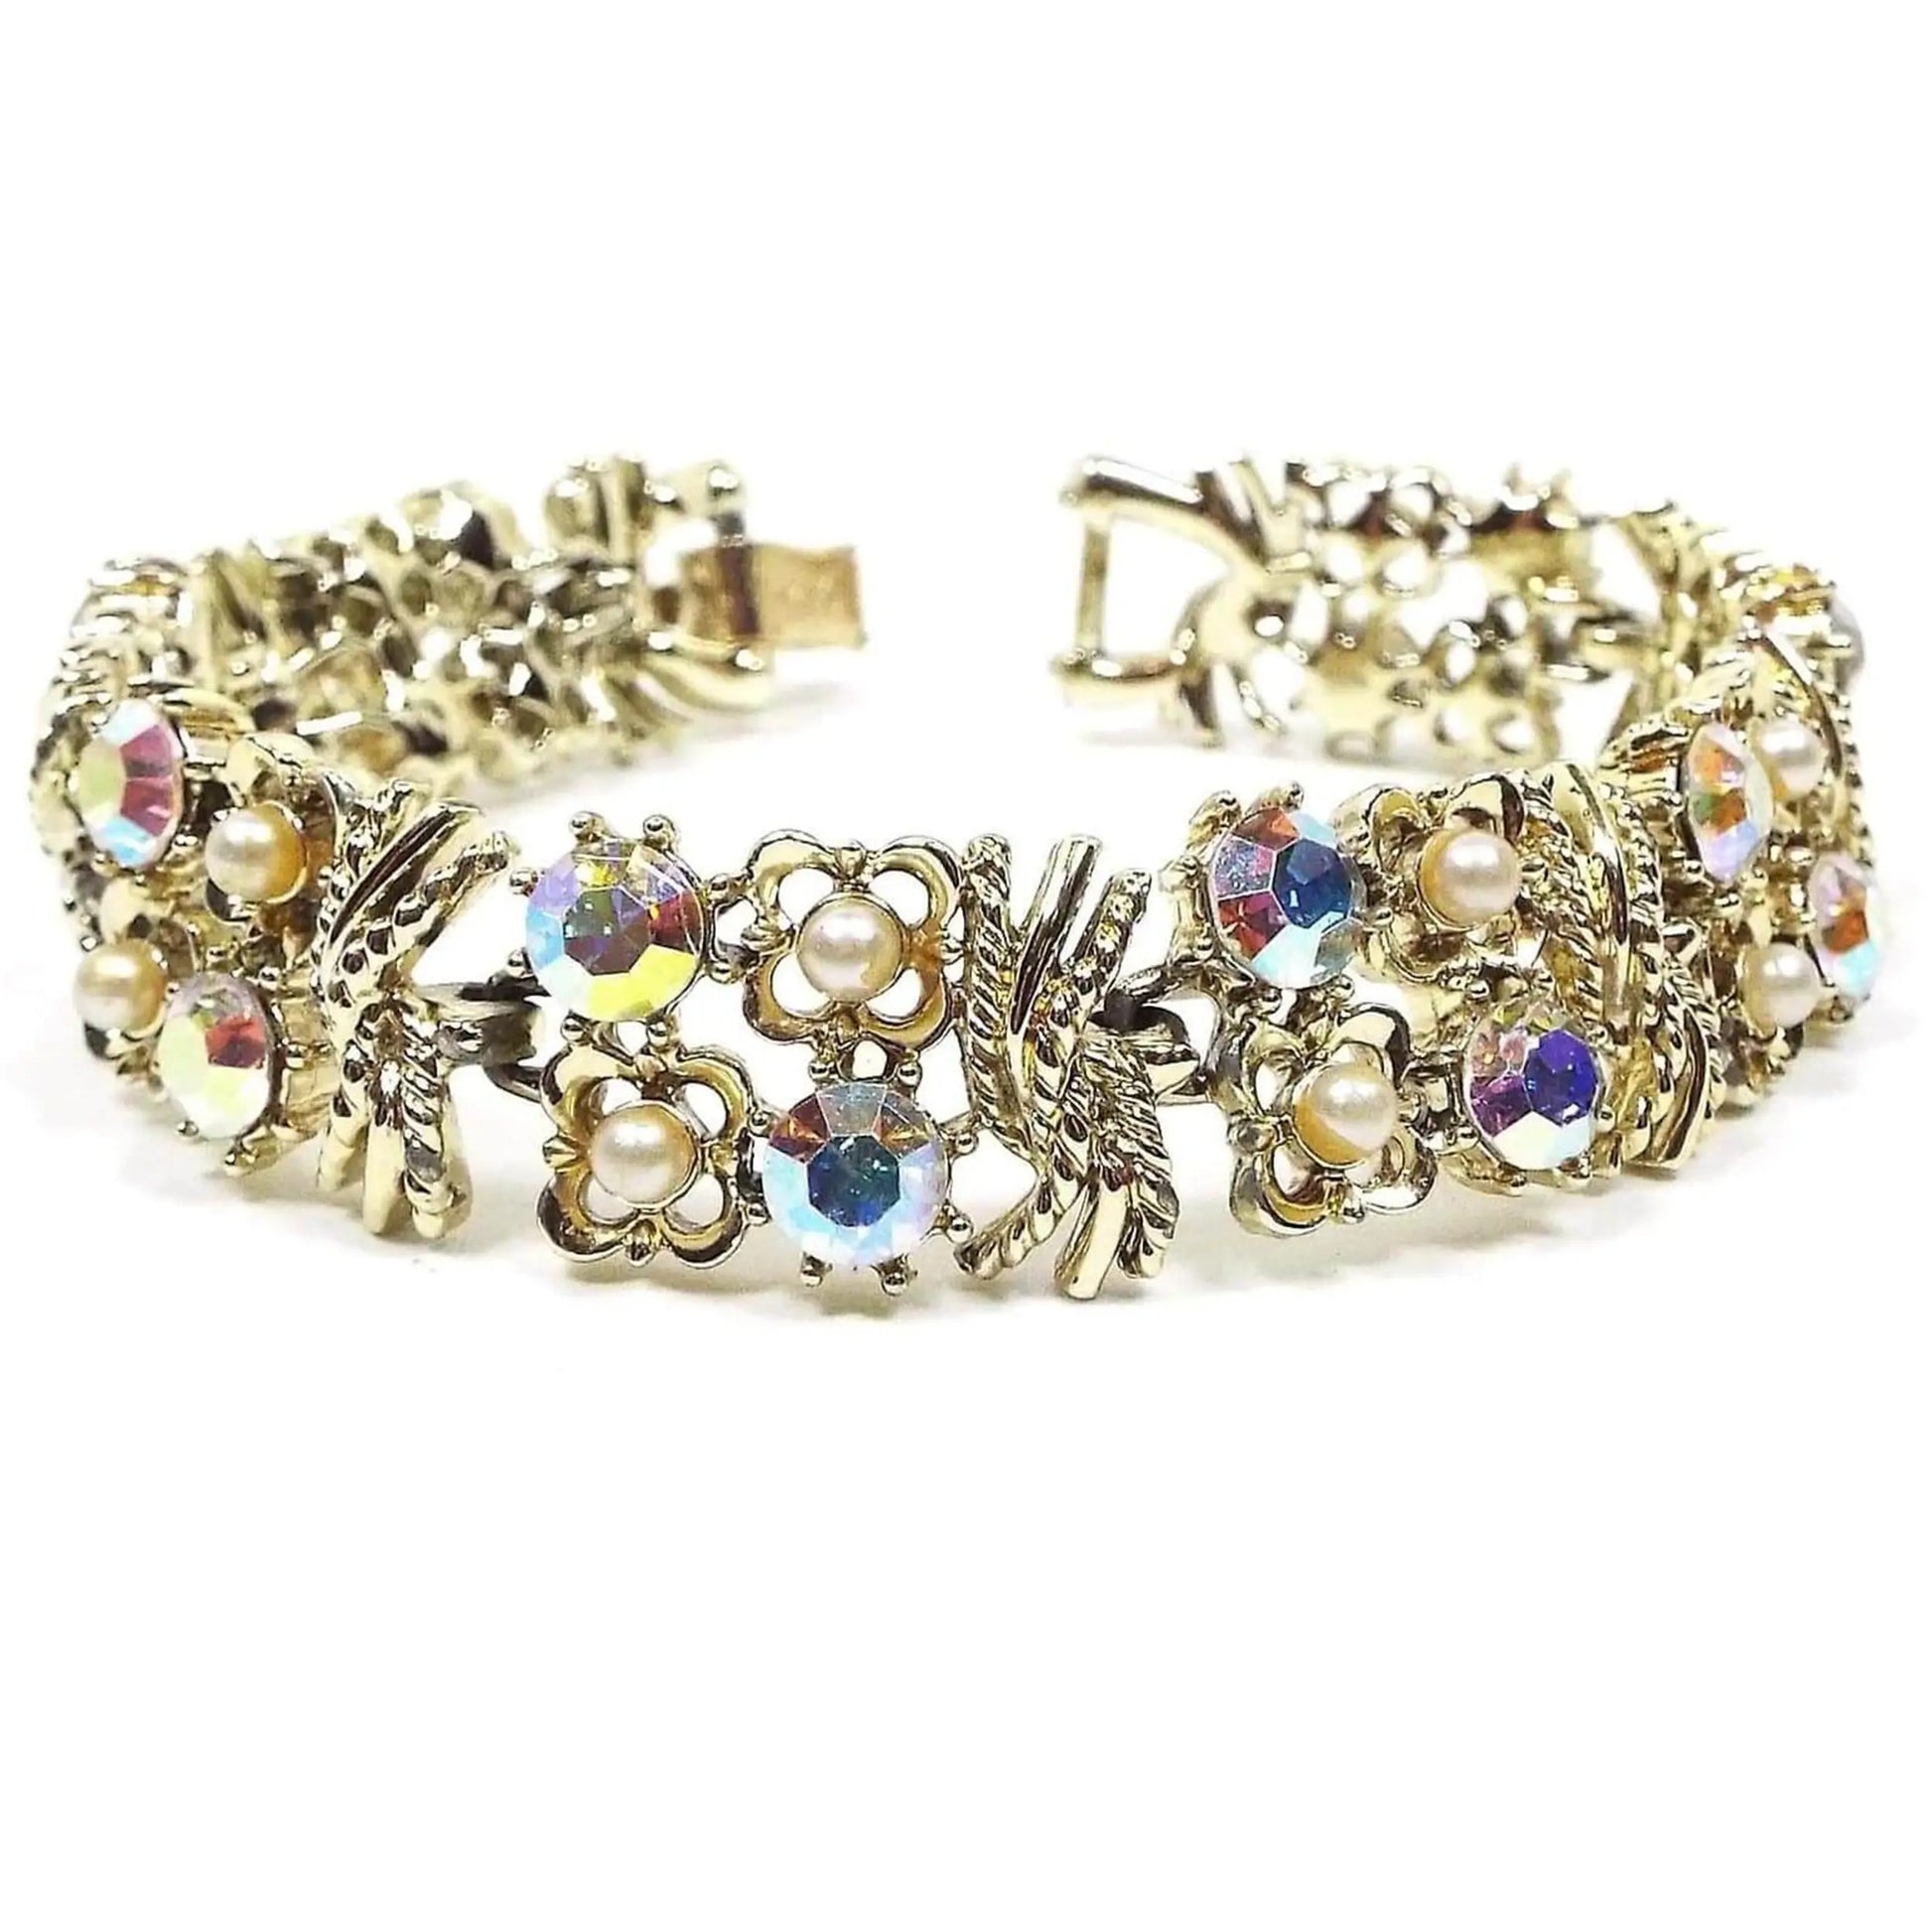 Front view of the top of the Mid Century vintage Coro rhinestone and faux pearl bracelet. It is gold tone in color and has a filigree floral design. Some of the flowers have AB rhinestones in the middle and others have small imitation pearls in them. There is a snap lock clasp at the end.